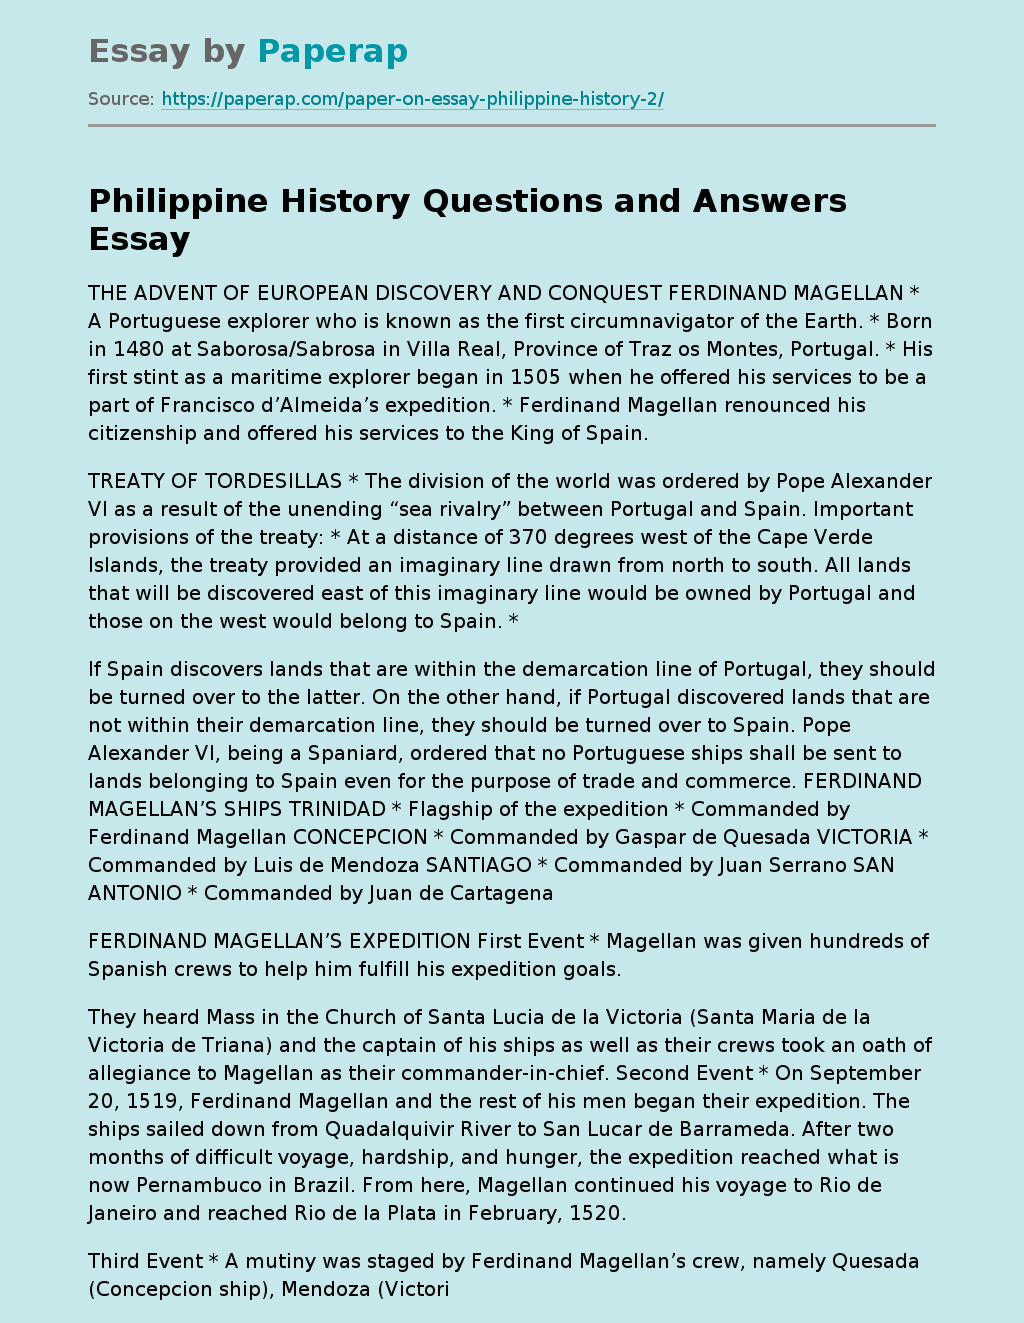 Philippine History Questions and Answers